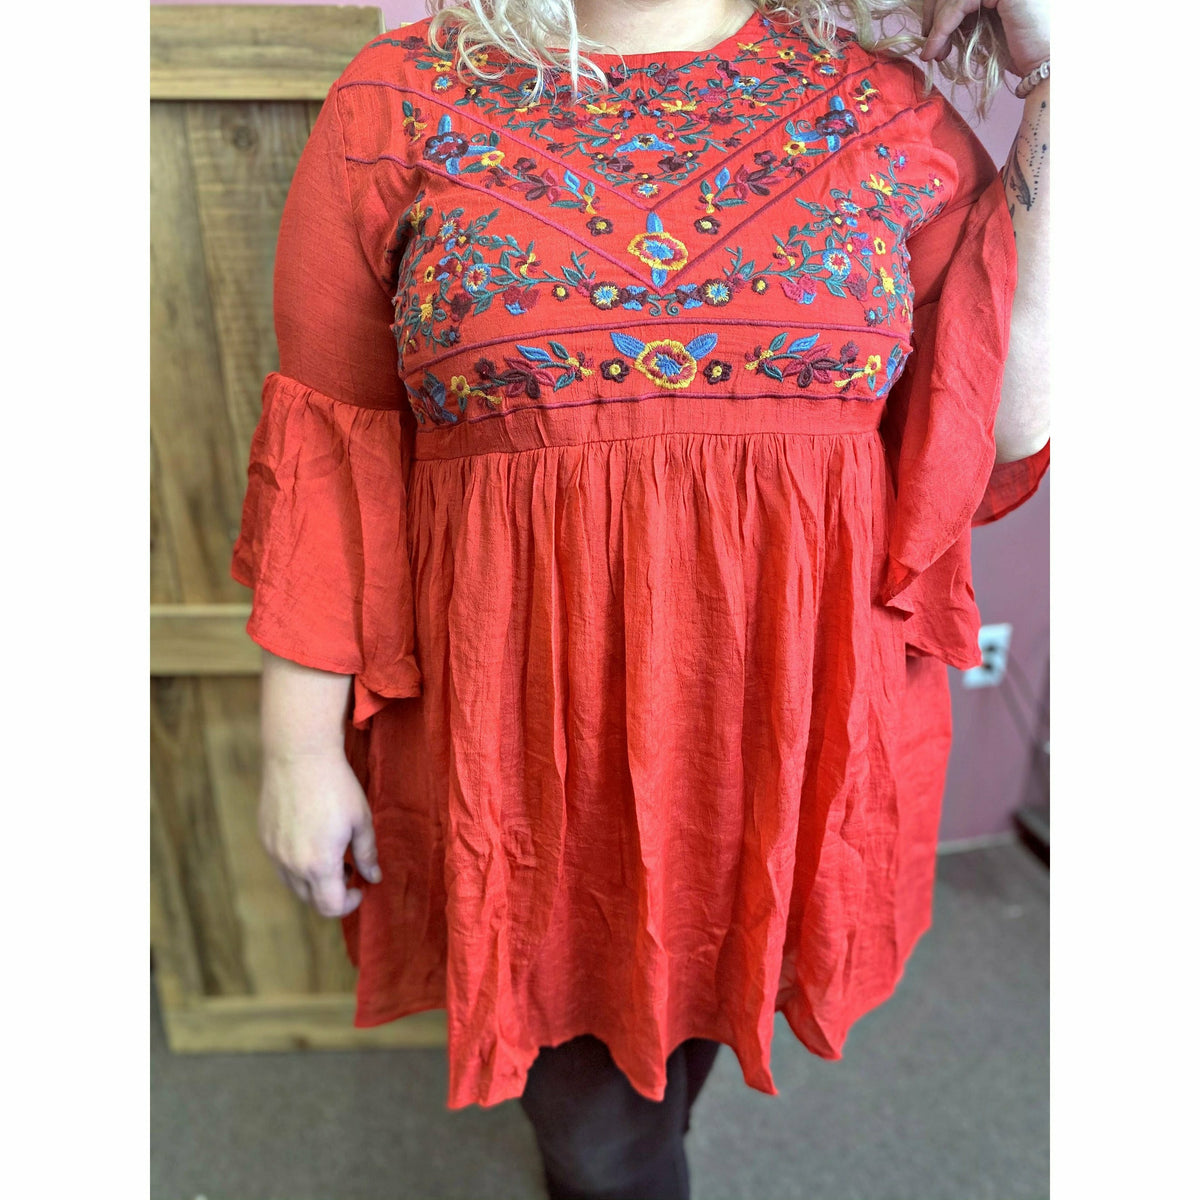 Entro Embroidered Red Tunic/Dress Plus